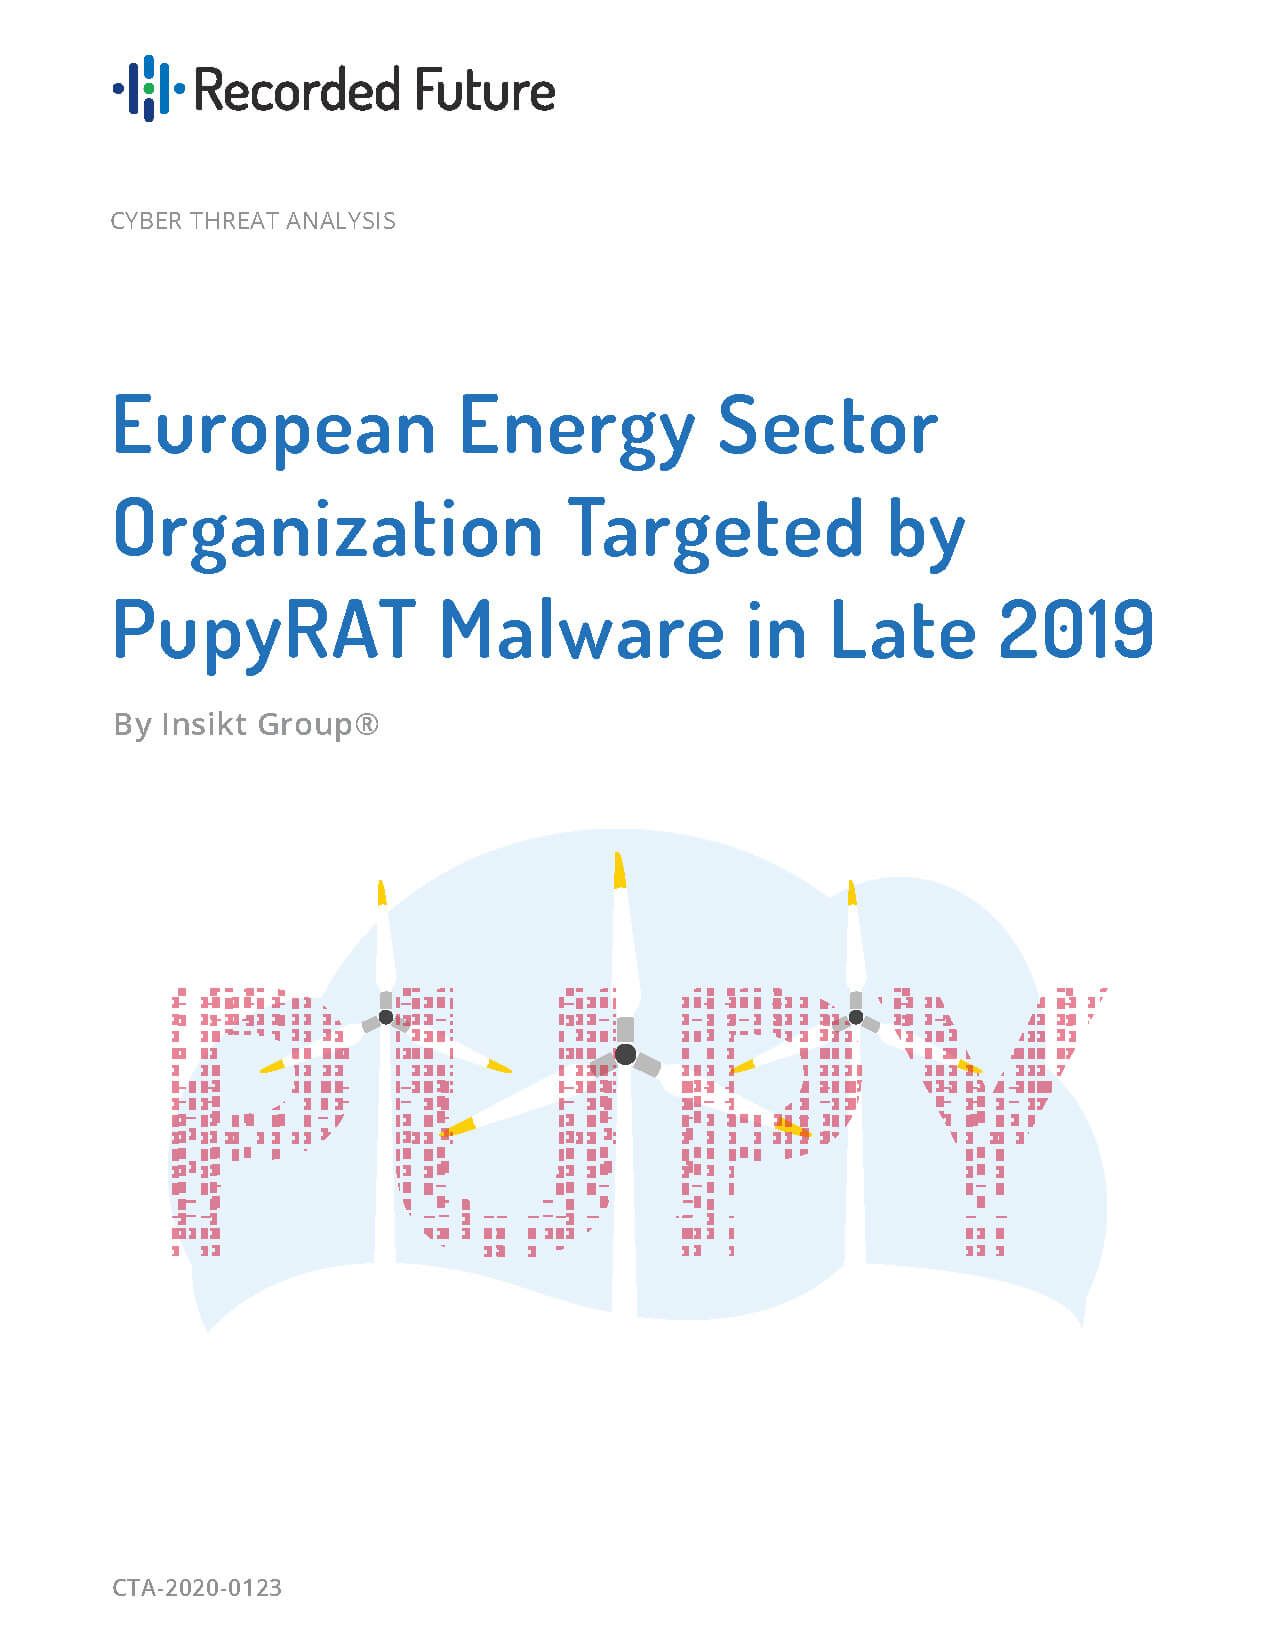 European Energy Sector Organization Targeted by PupyRAT Malware in Late 2019 Report